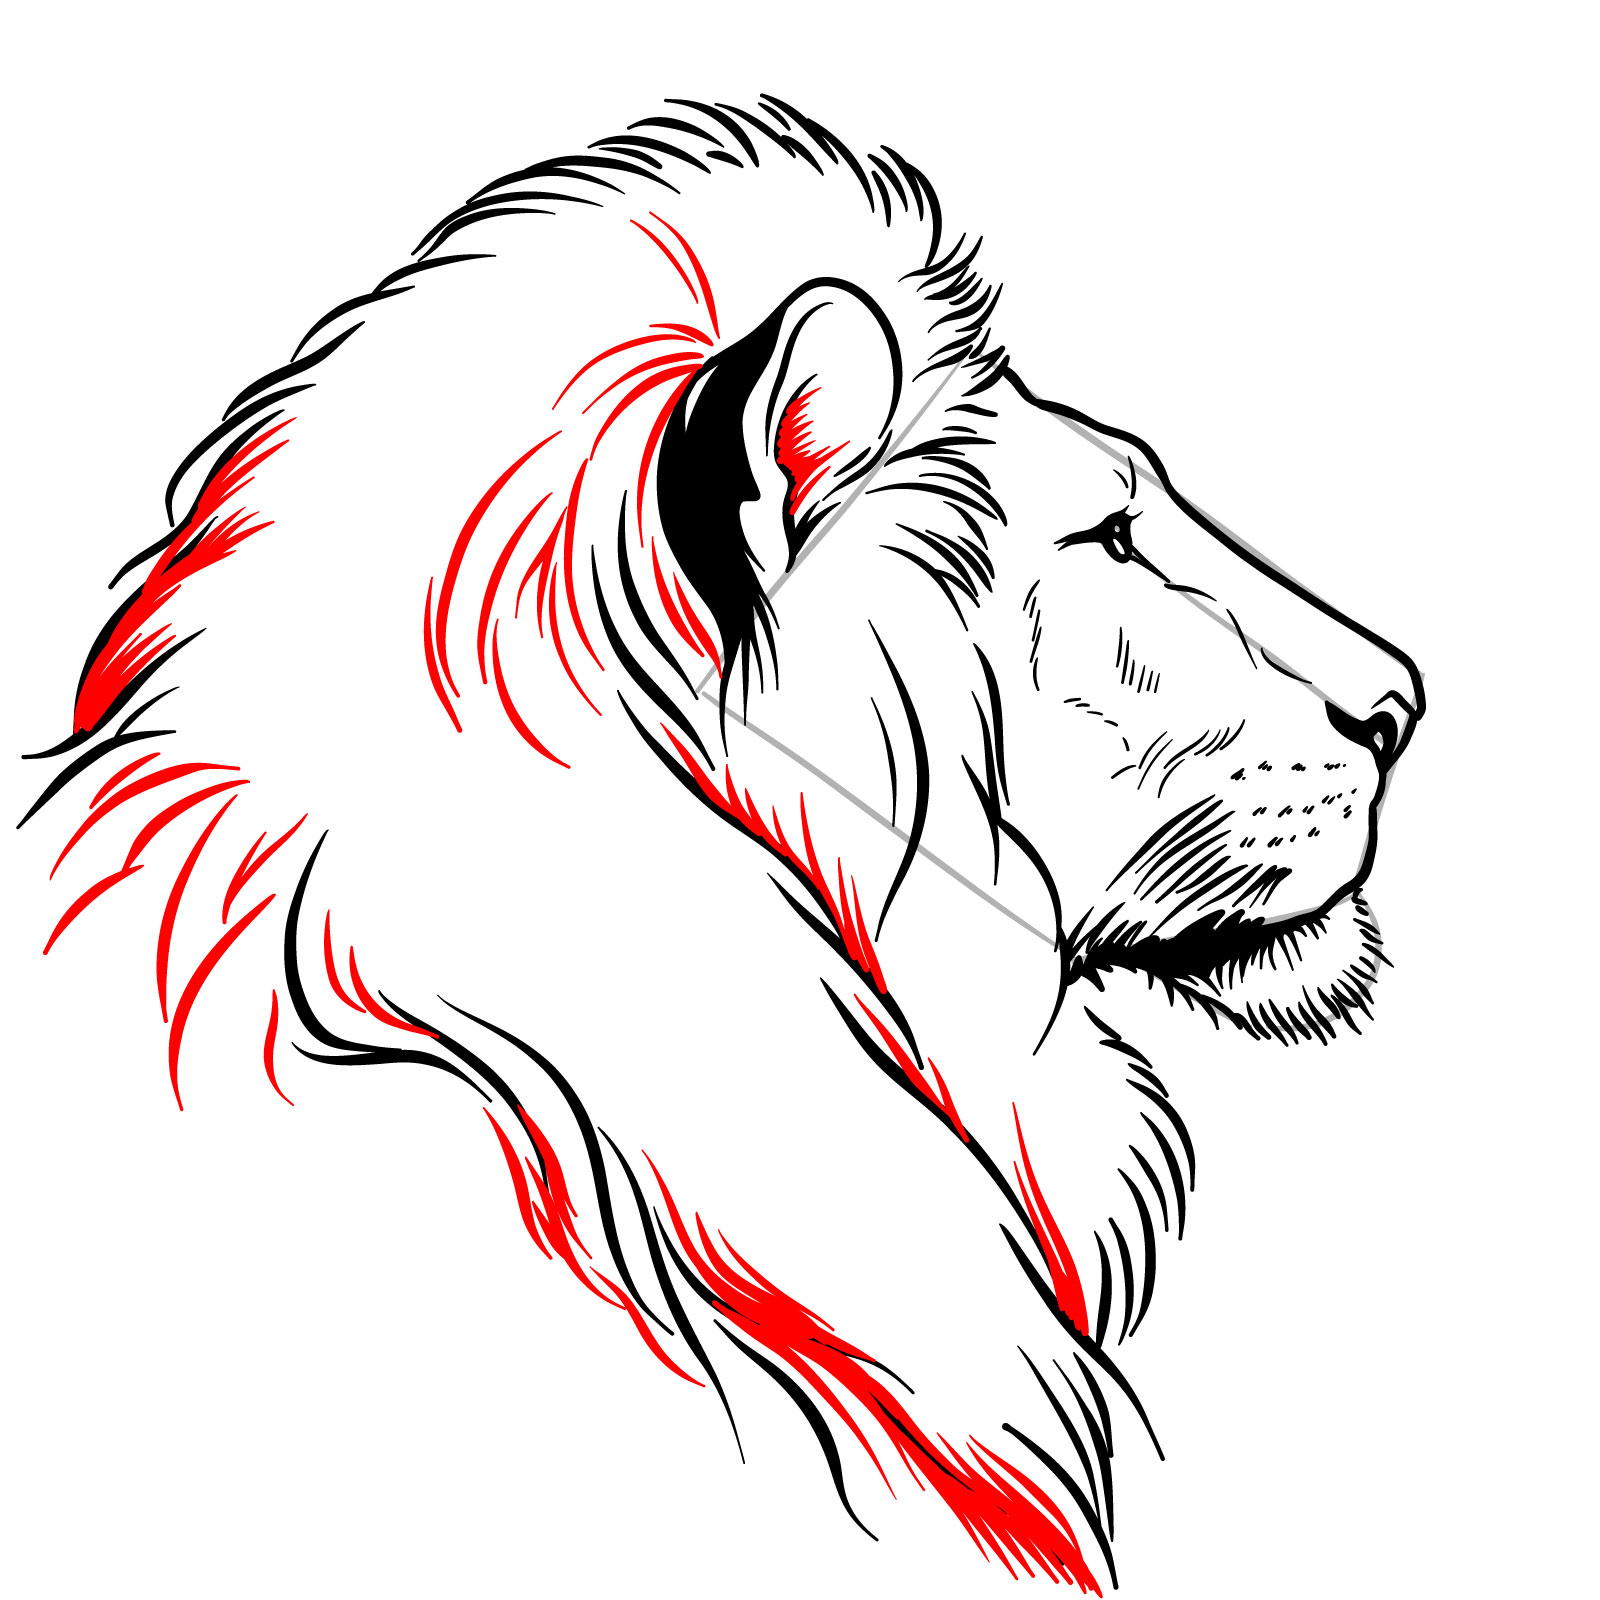 Additional mane fur and inner ear shading on a lion's head drawing - step 09